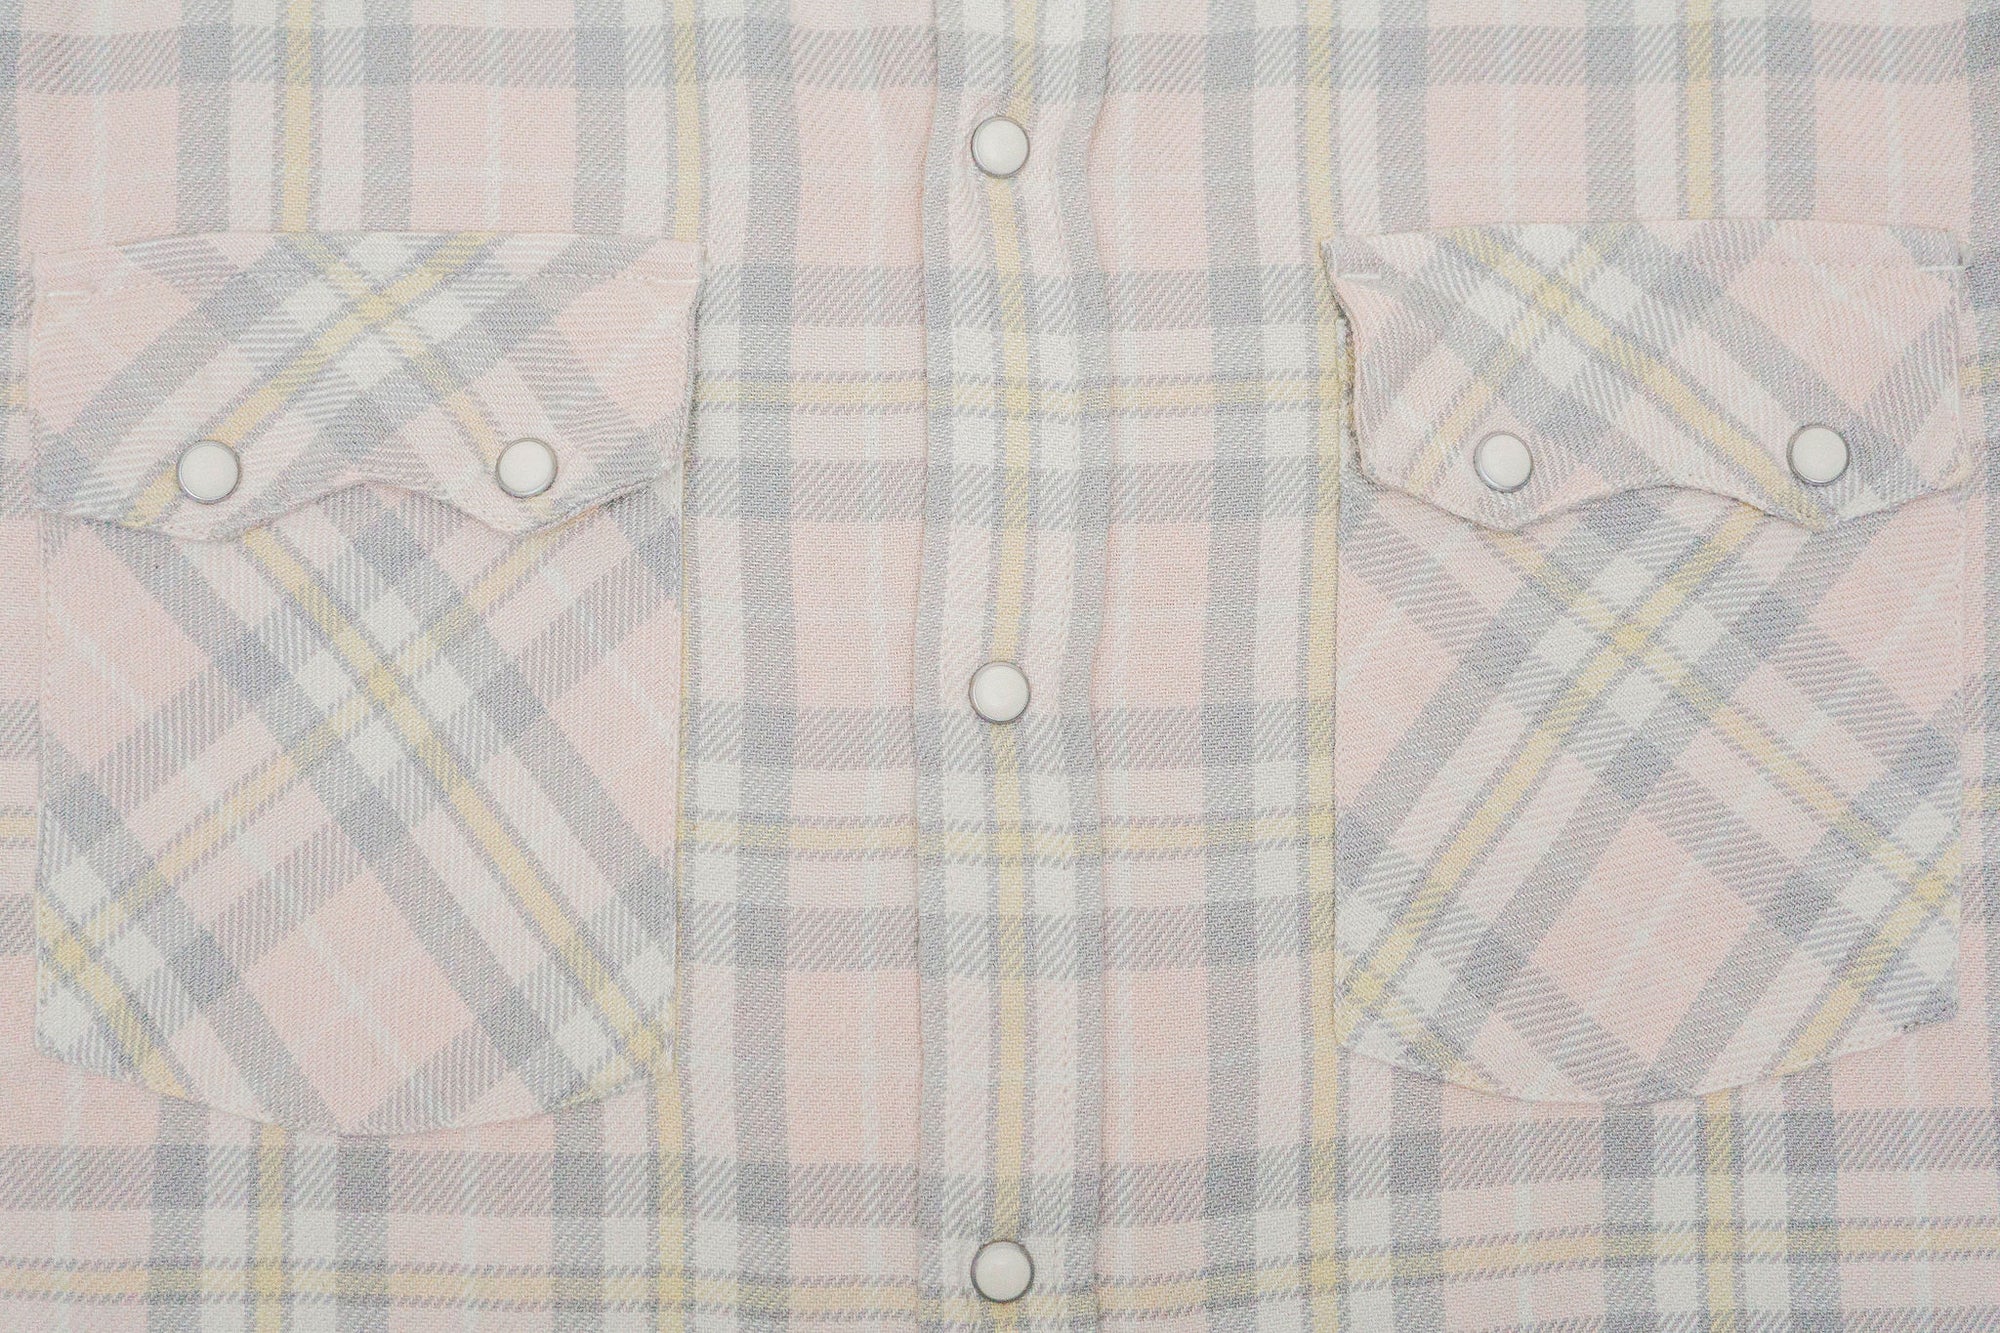 Wythe Flannel Pearlsnap Shirt - Abiquiu Sunset